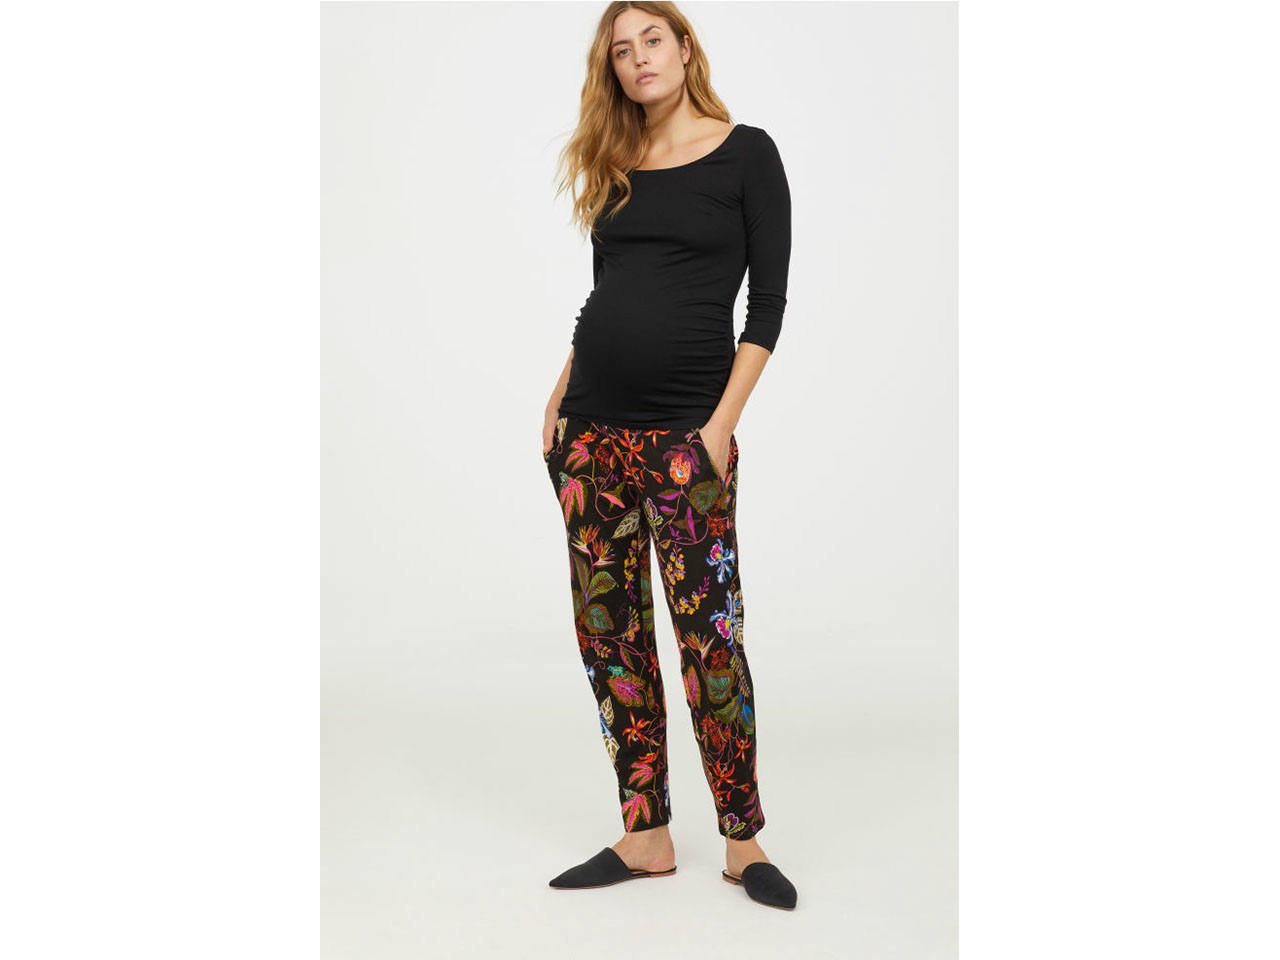 A pregnant woman wearing patterned maternity pants and a black top